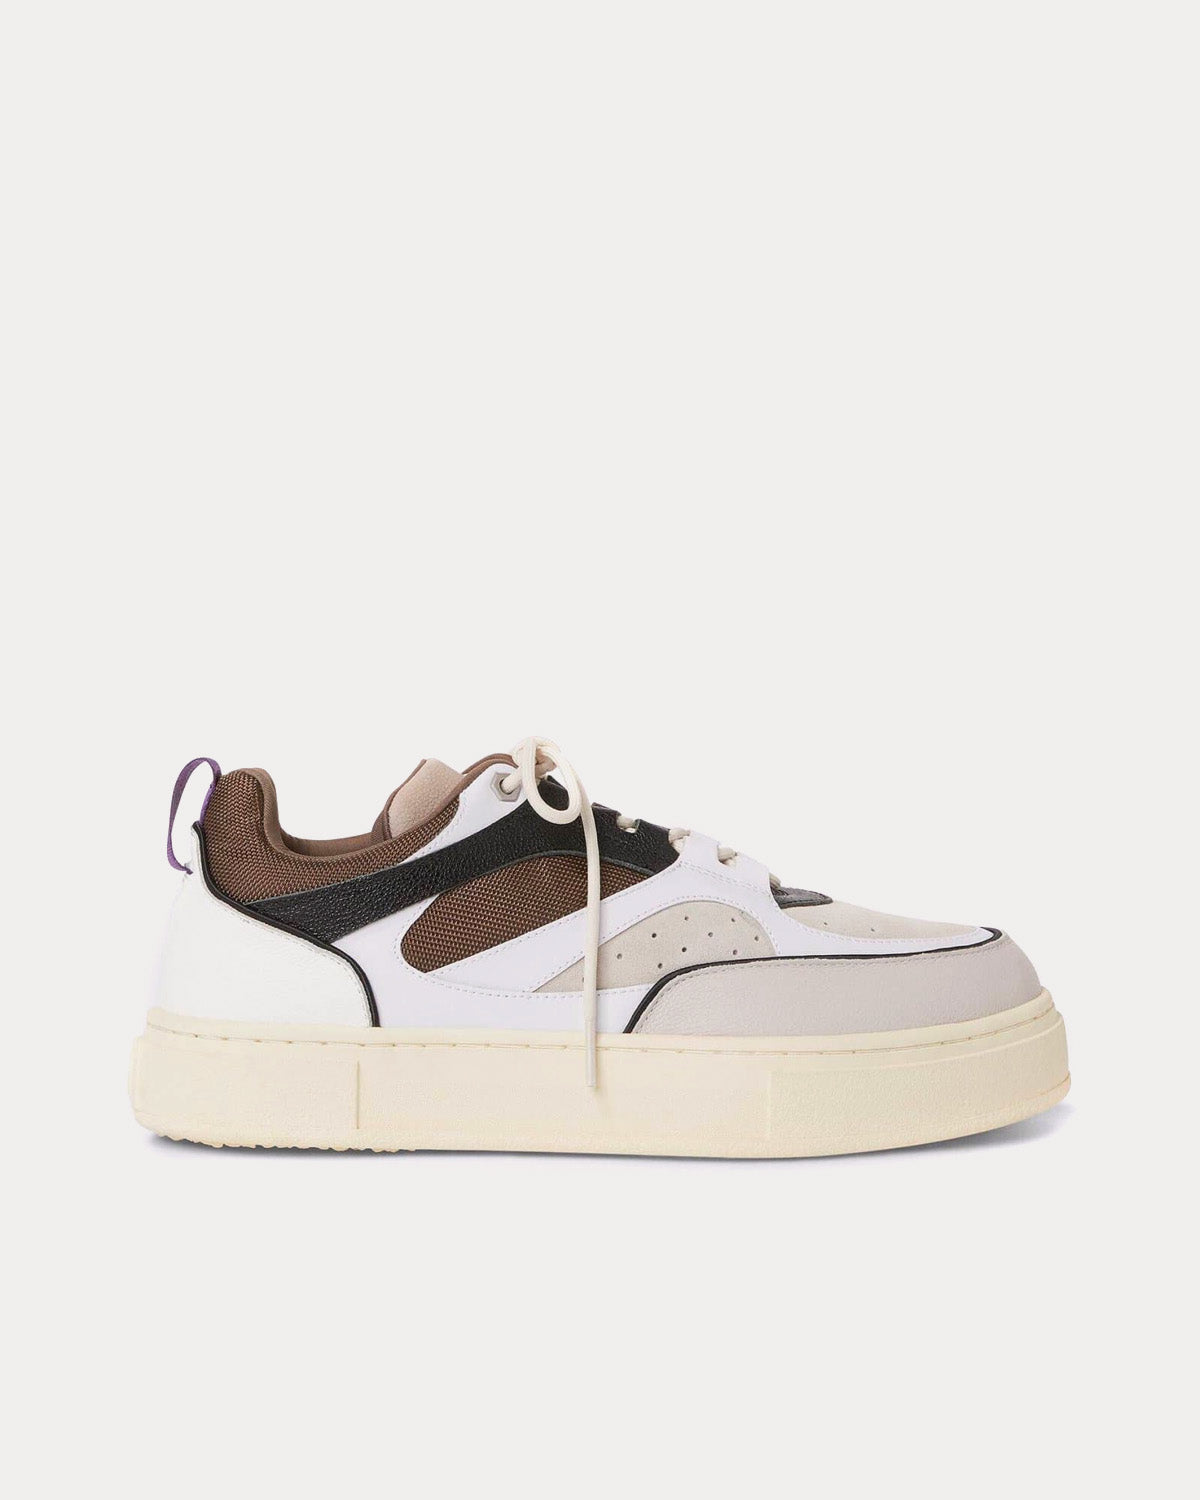 Eytys - Sidney Leather Macchiato Low Top Sneakers